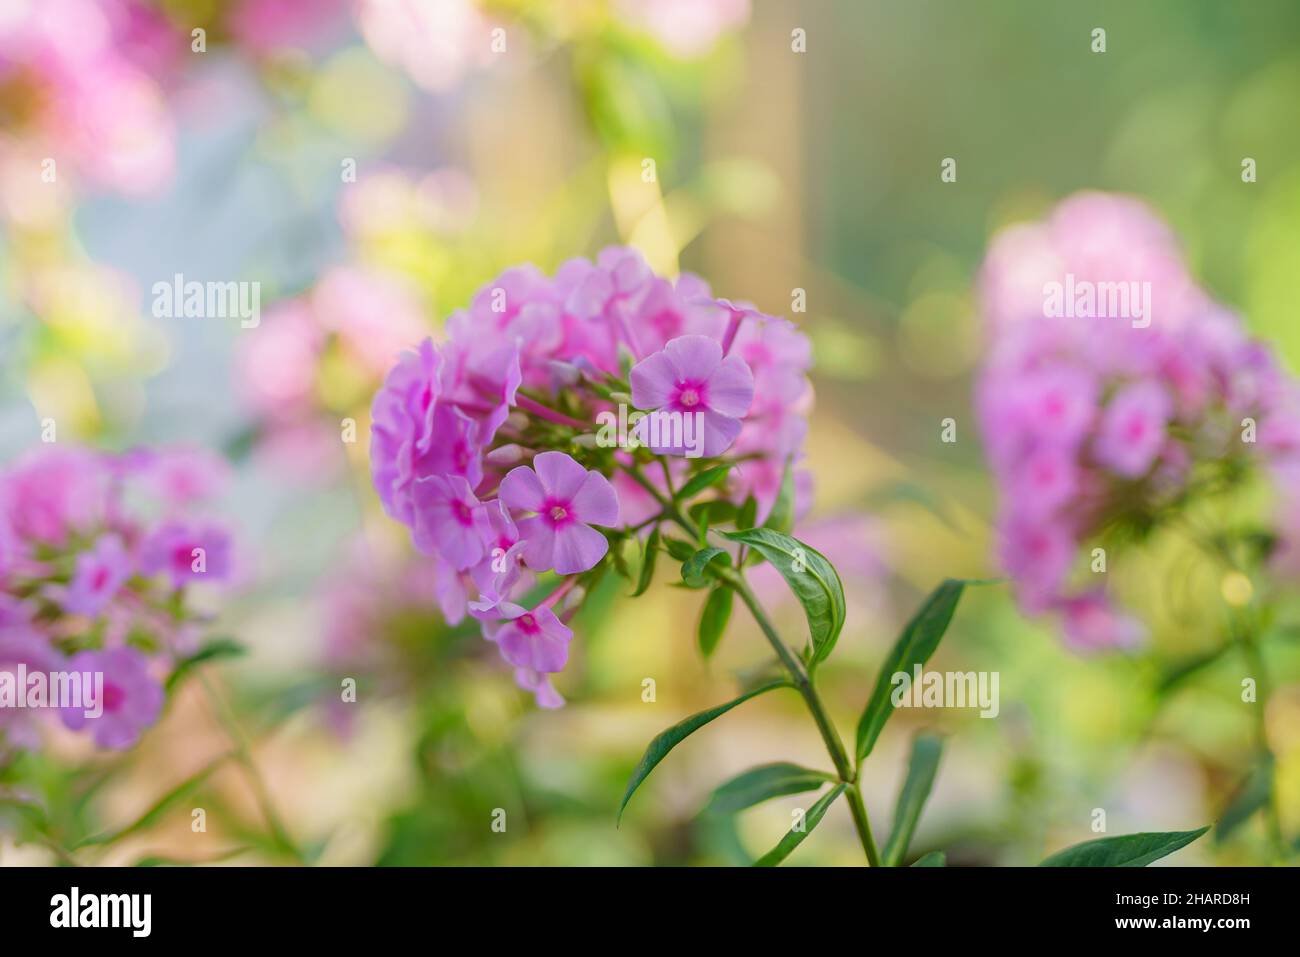 Pink phlox (Phlox paniculata) blooms in the summer garden. Fall phlox close up in bloom with beautiful soft green background Stock Photo